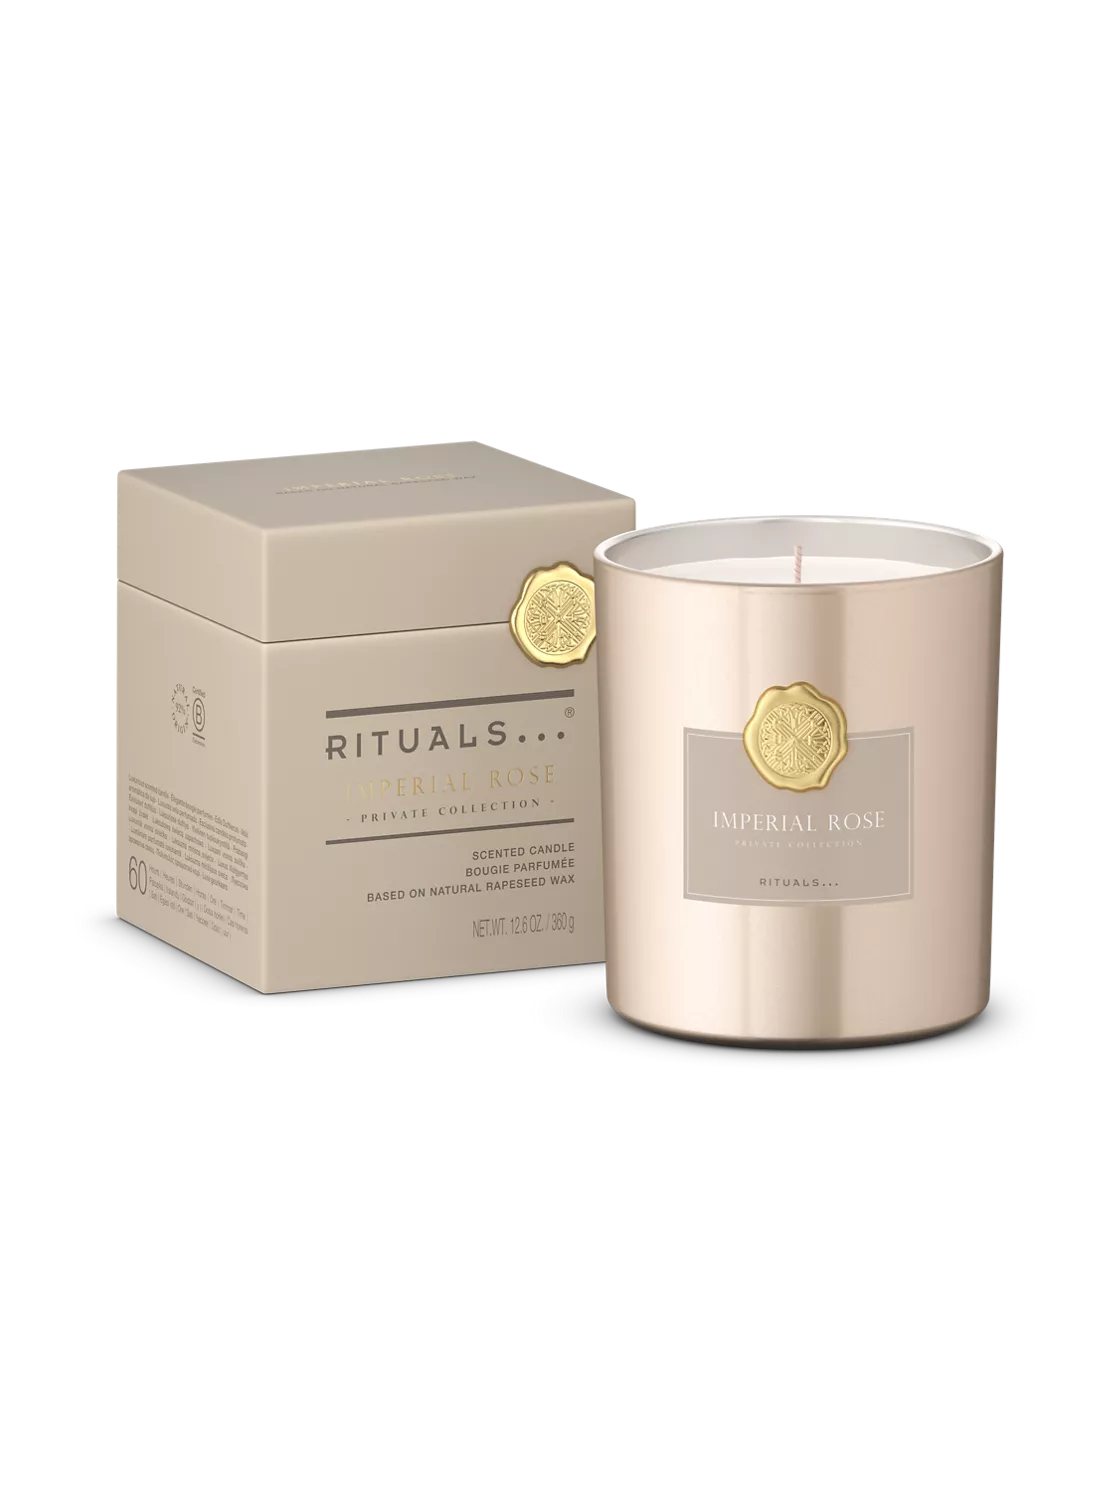 RITUALS Imperial Rose Luxury Oil Reed Diffuser Set - Fragrance Sticks with  Rose Oil & Green Tea - 15.2 Fl Oz